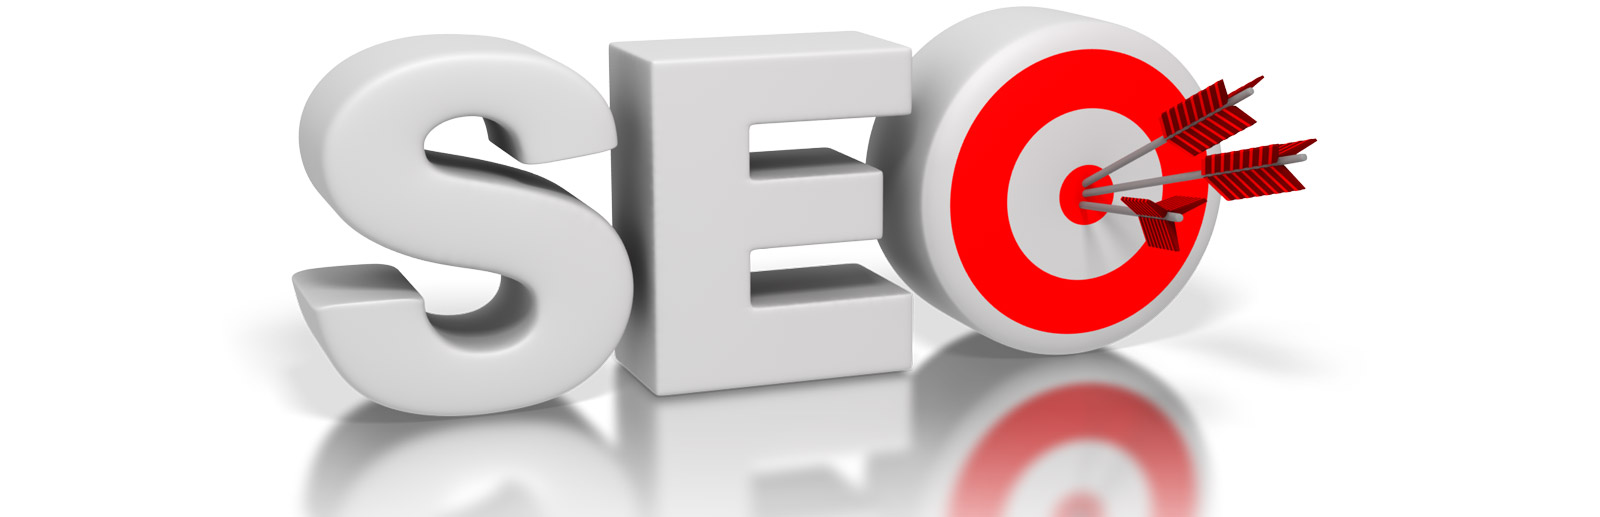 SEO website optimization for Google search